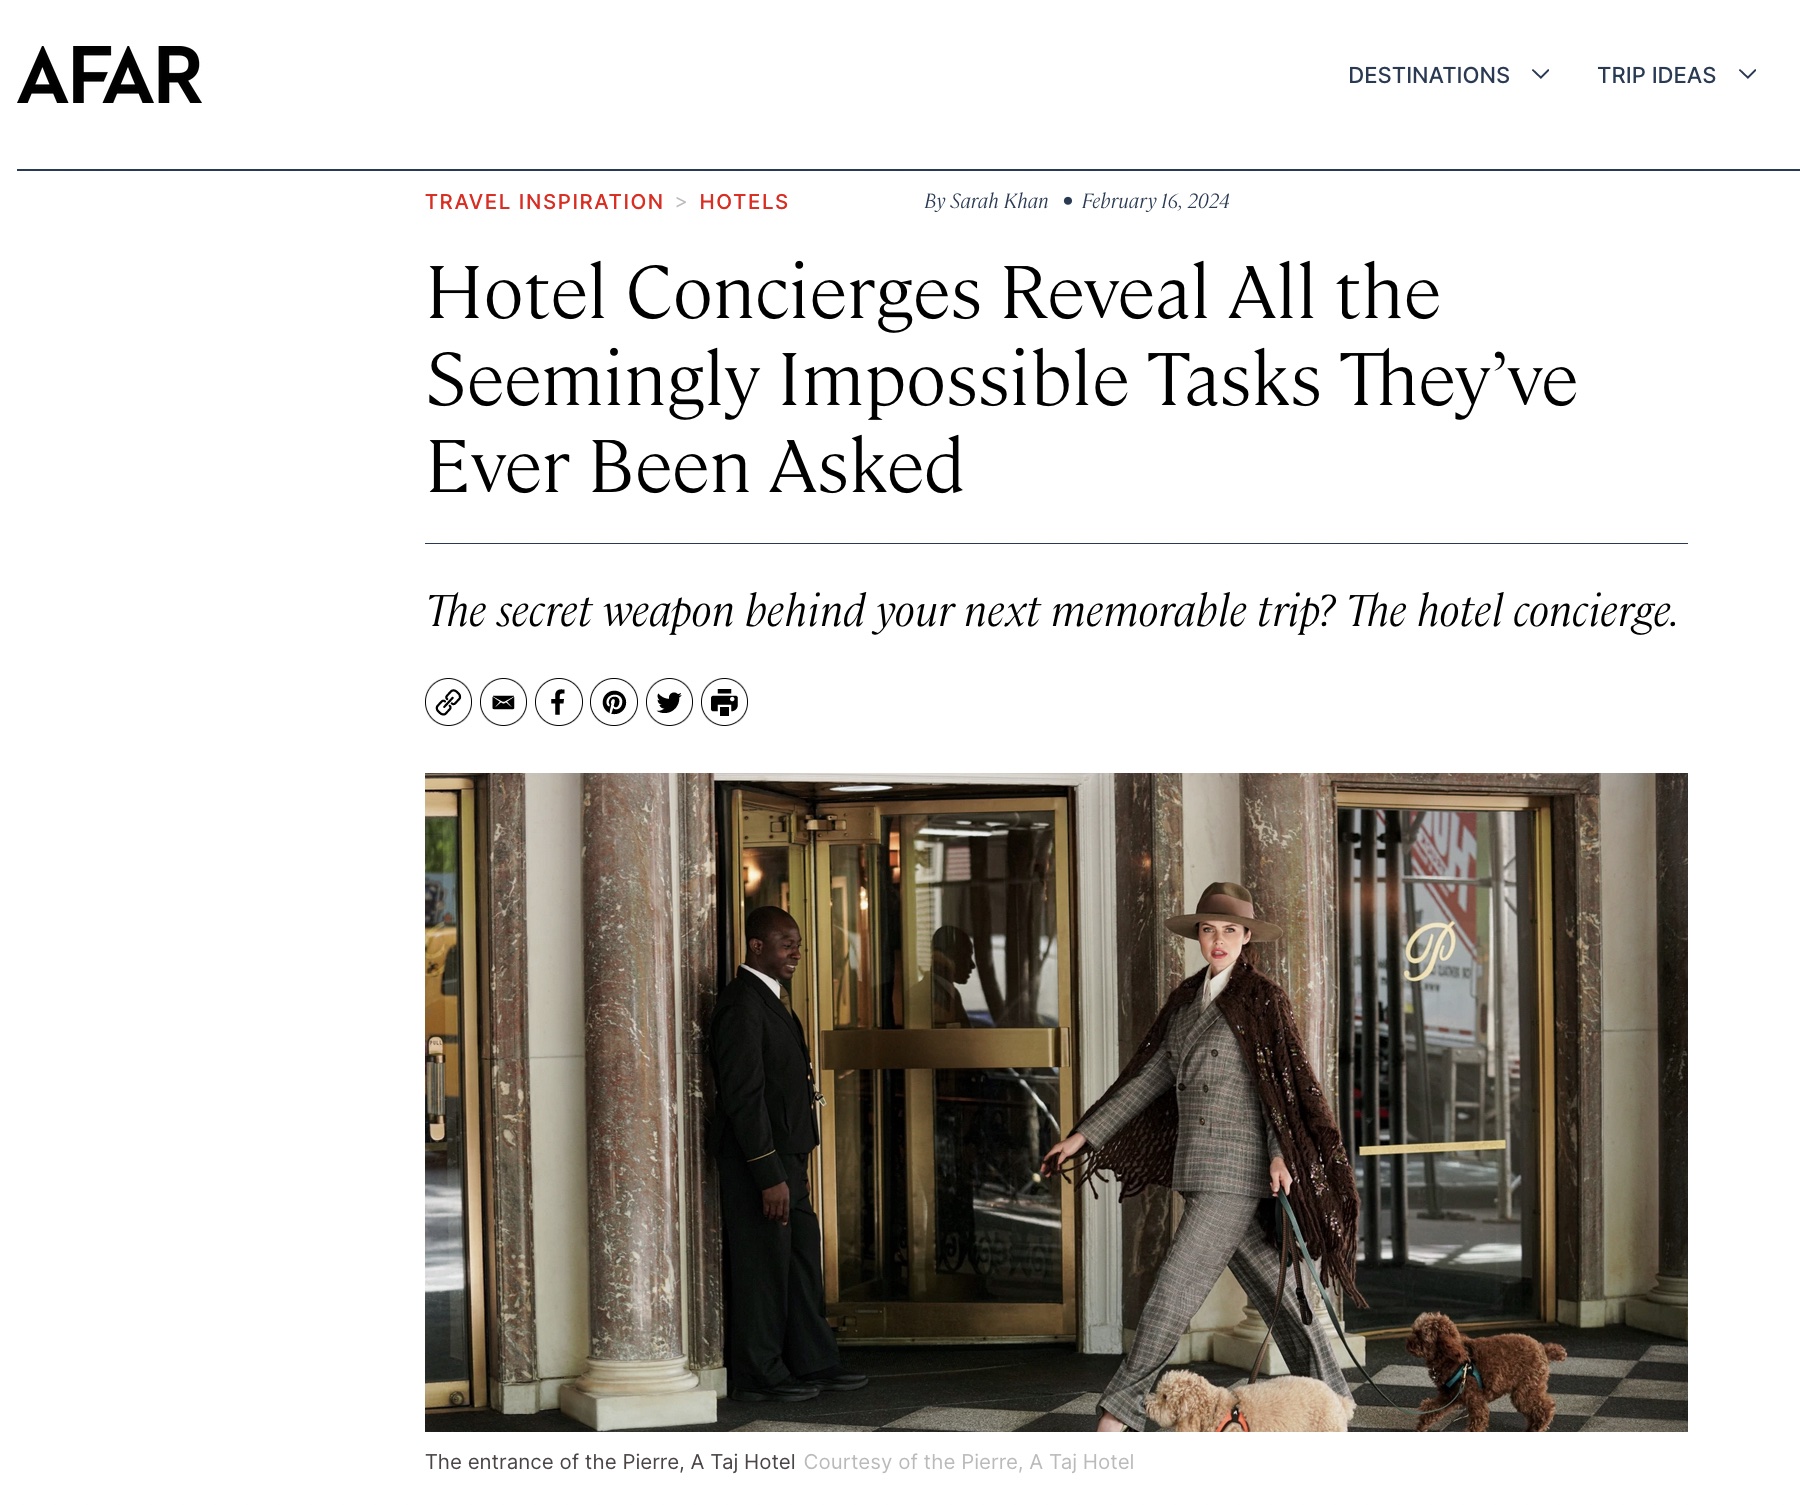 Afar: Hotel Concierges Reveal All the Seemingly Impossible Tasks They’ve Ever Been Asked